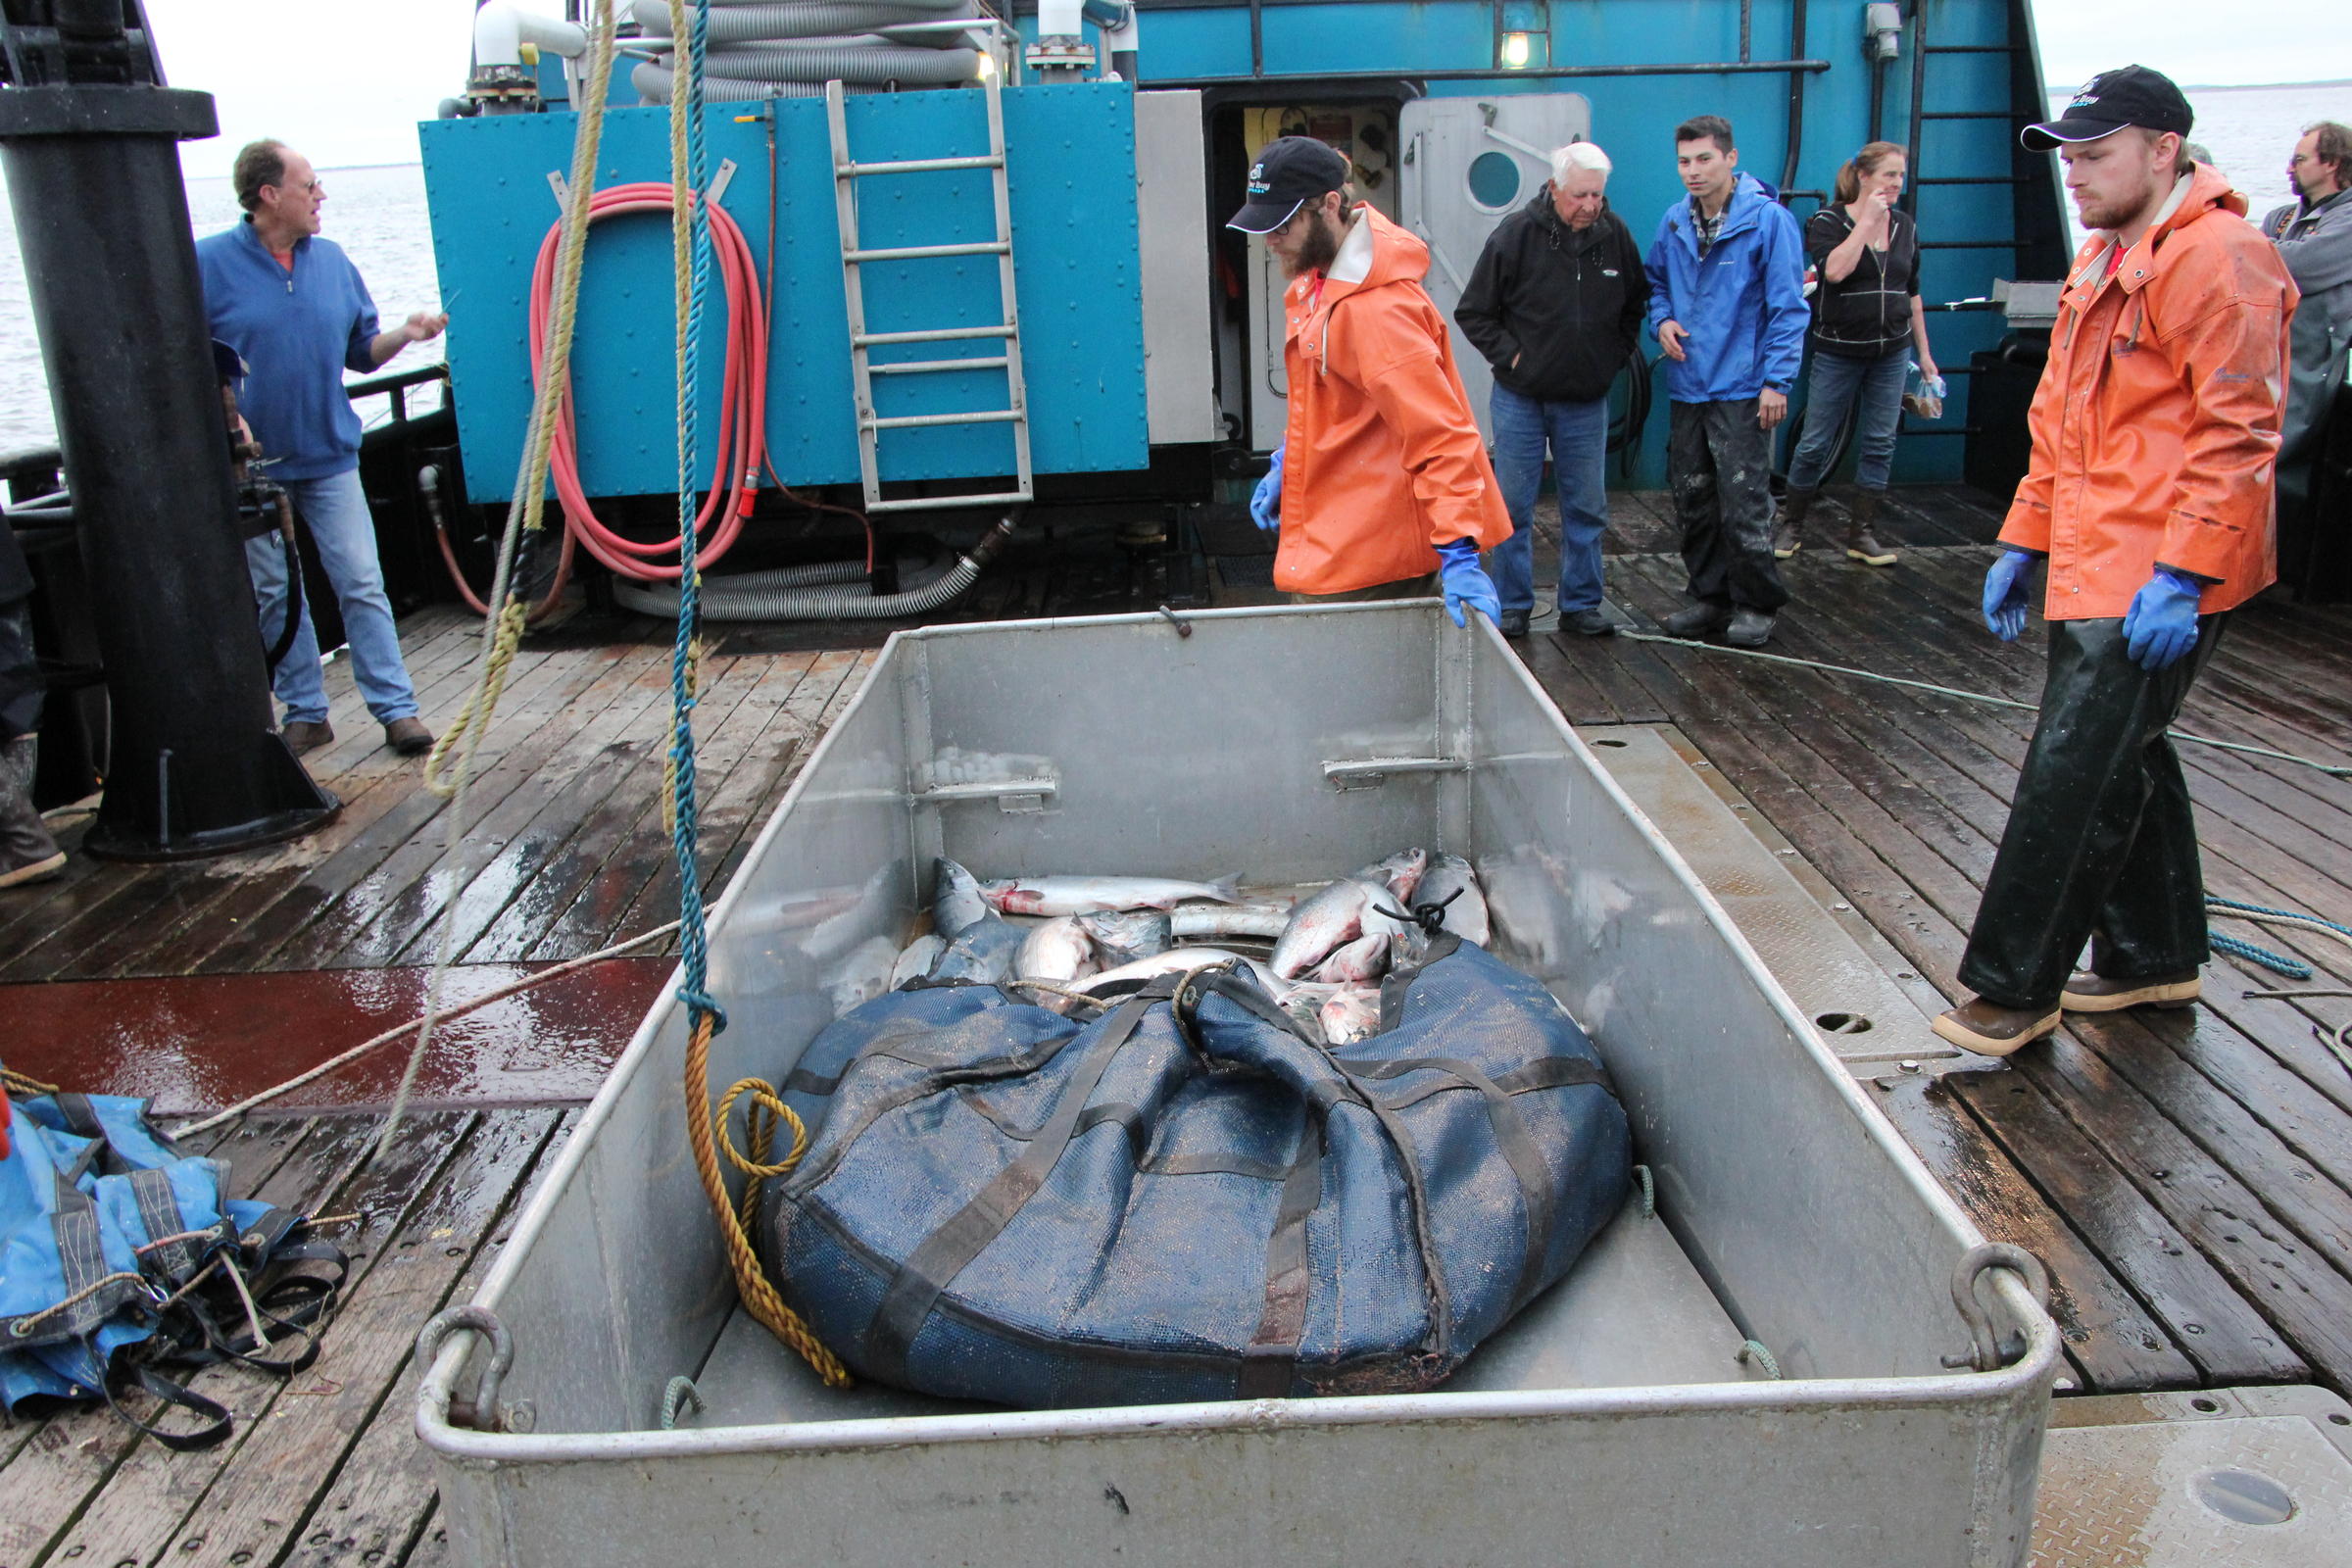 One of skipper Howard Knutsen's bags of sockeye being delivered to the F/V Lady Helen in Ugashik. Knutsen, 86, is the oldest actively fishing drift permit holder in the Bay, and was among thousands of fishermen who landed Bristol Bay's two billionth salmon this season. (Photo by KDLG)